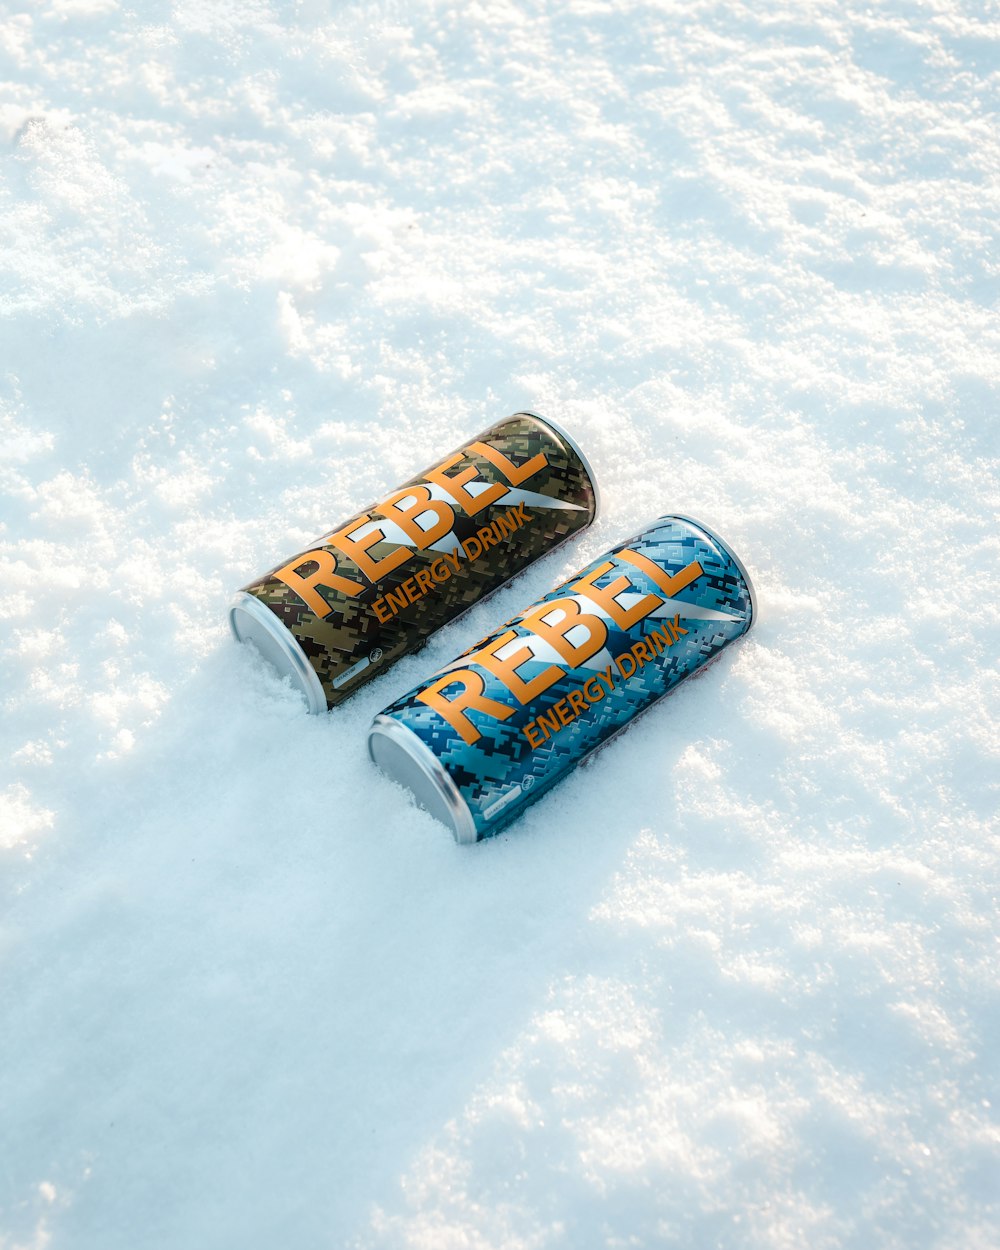 two cans of energy drink sitting in the snow